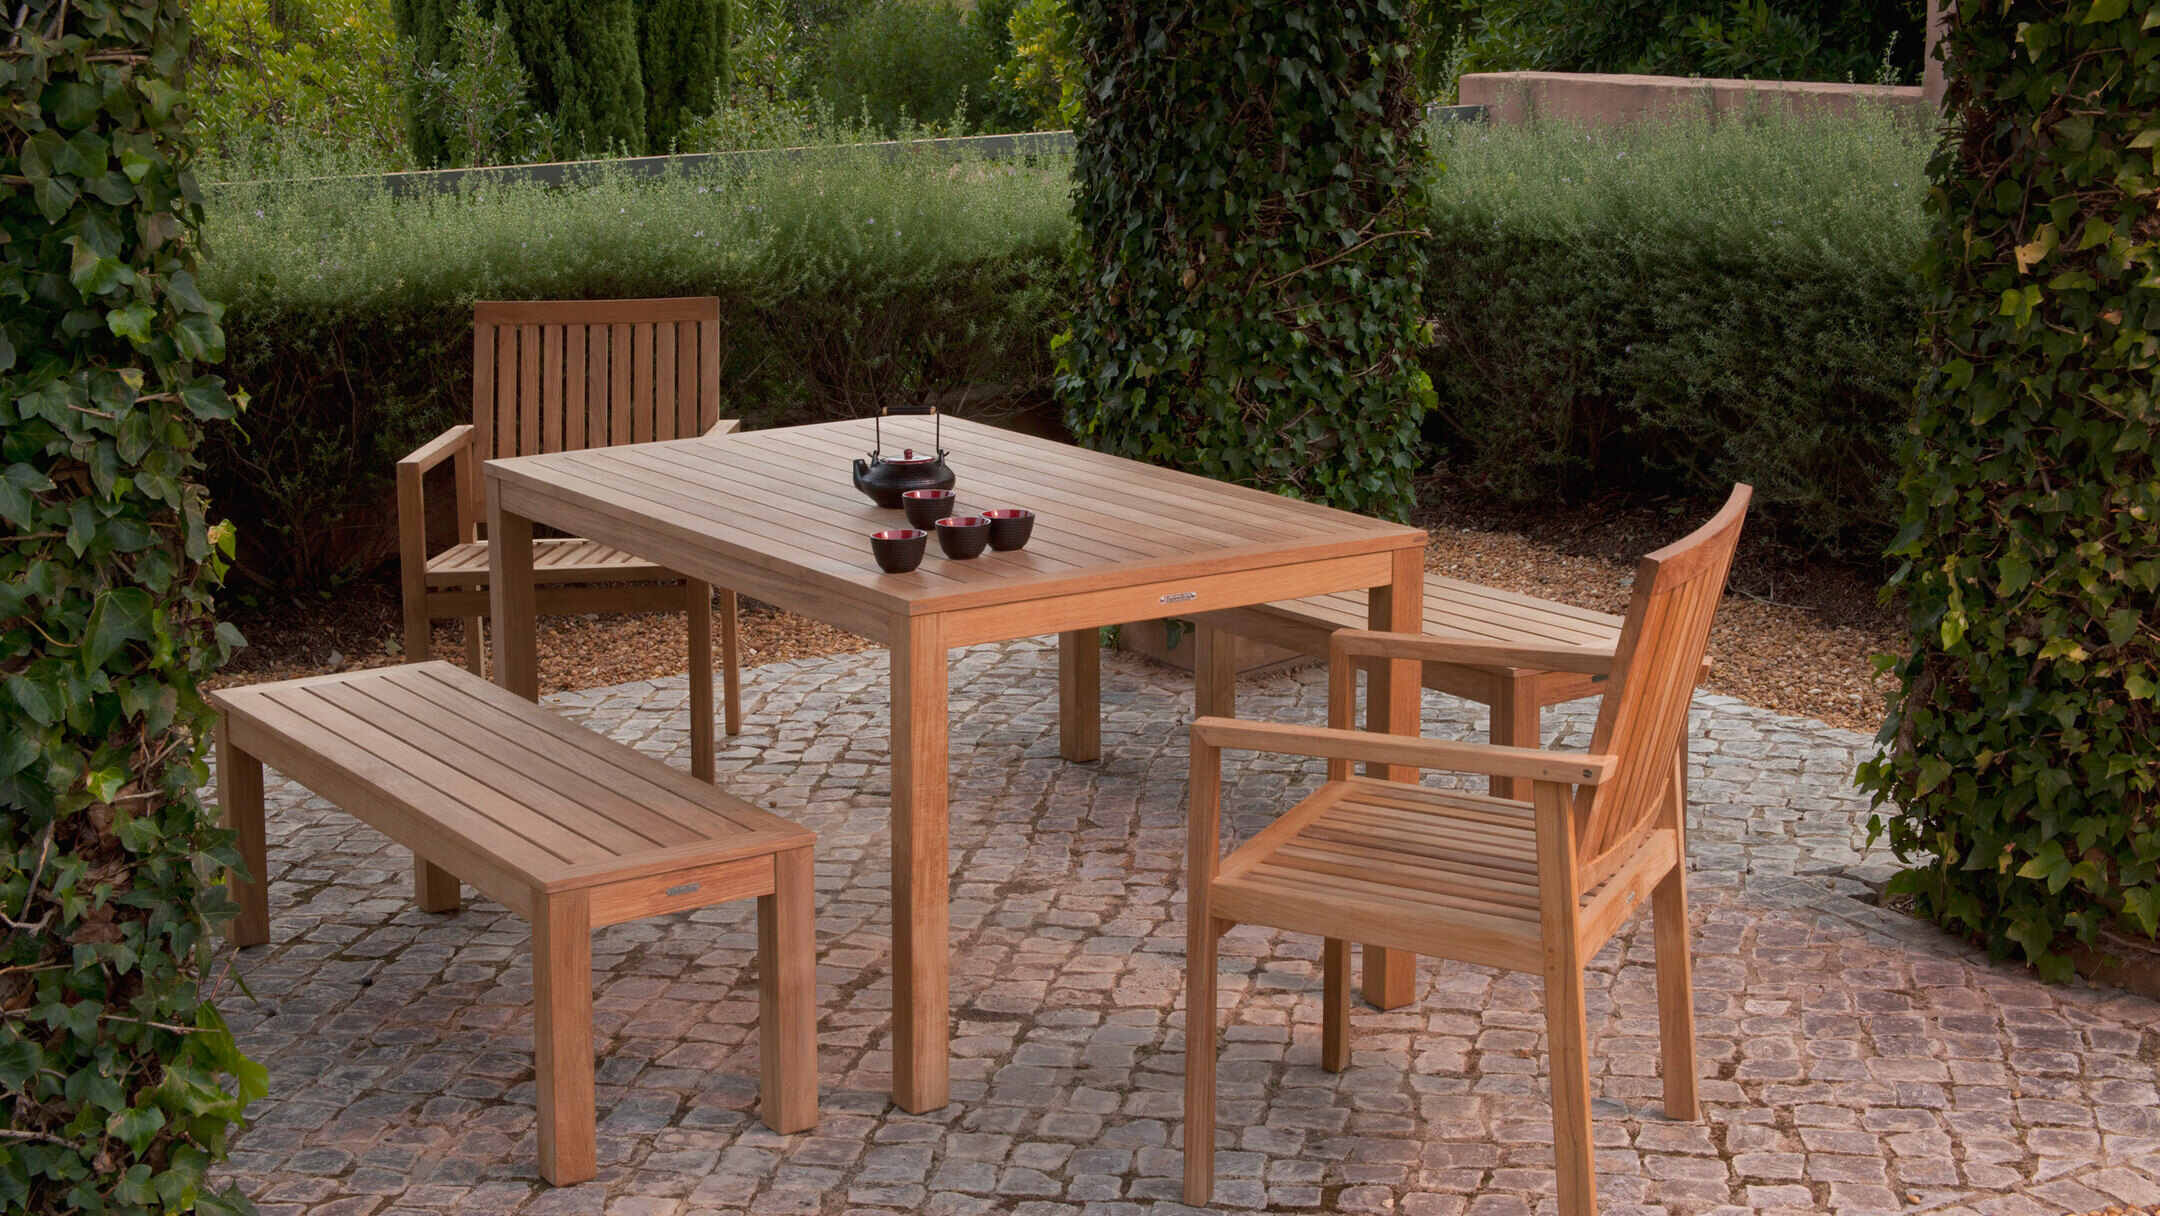 How To Protect Outdoor Wood Furniture From Elements